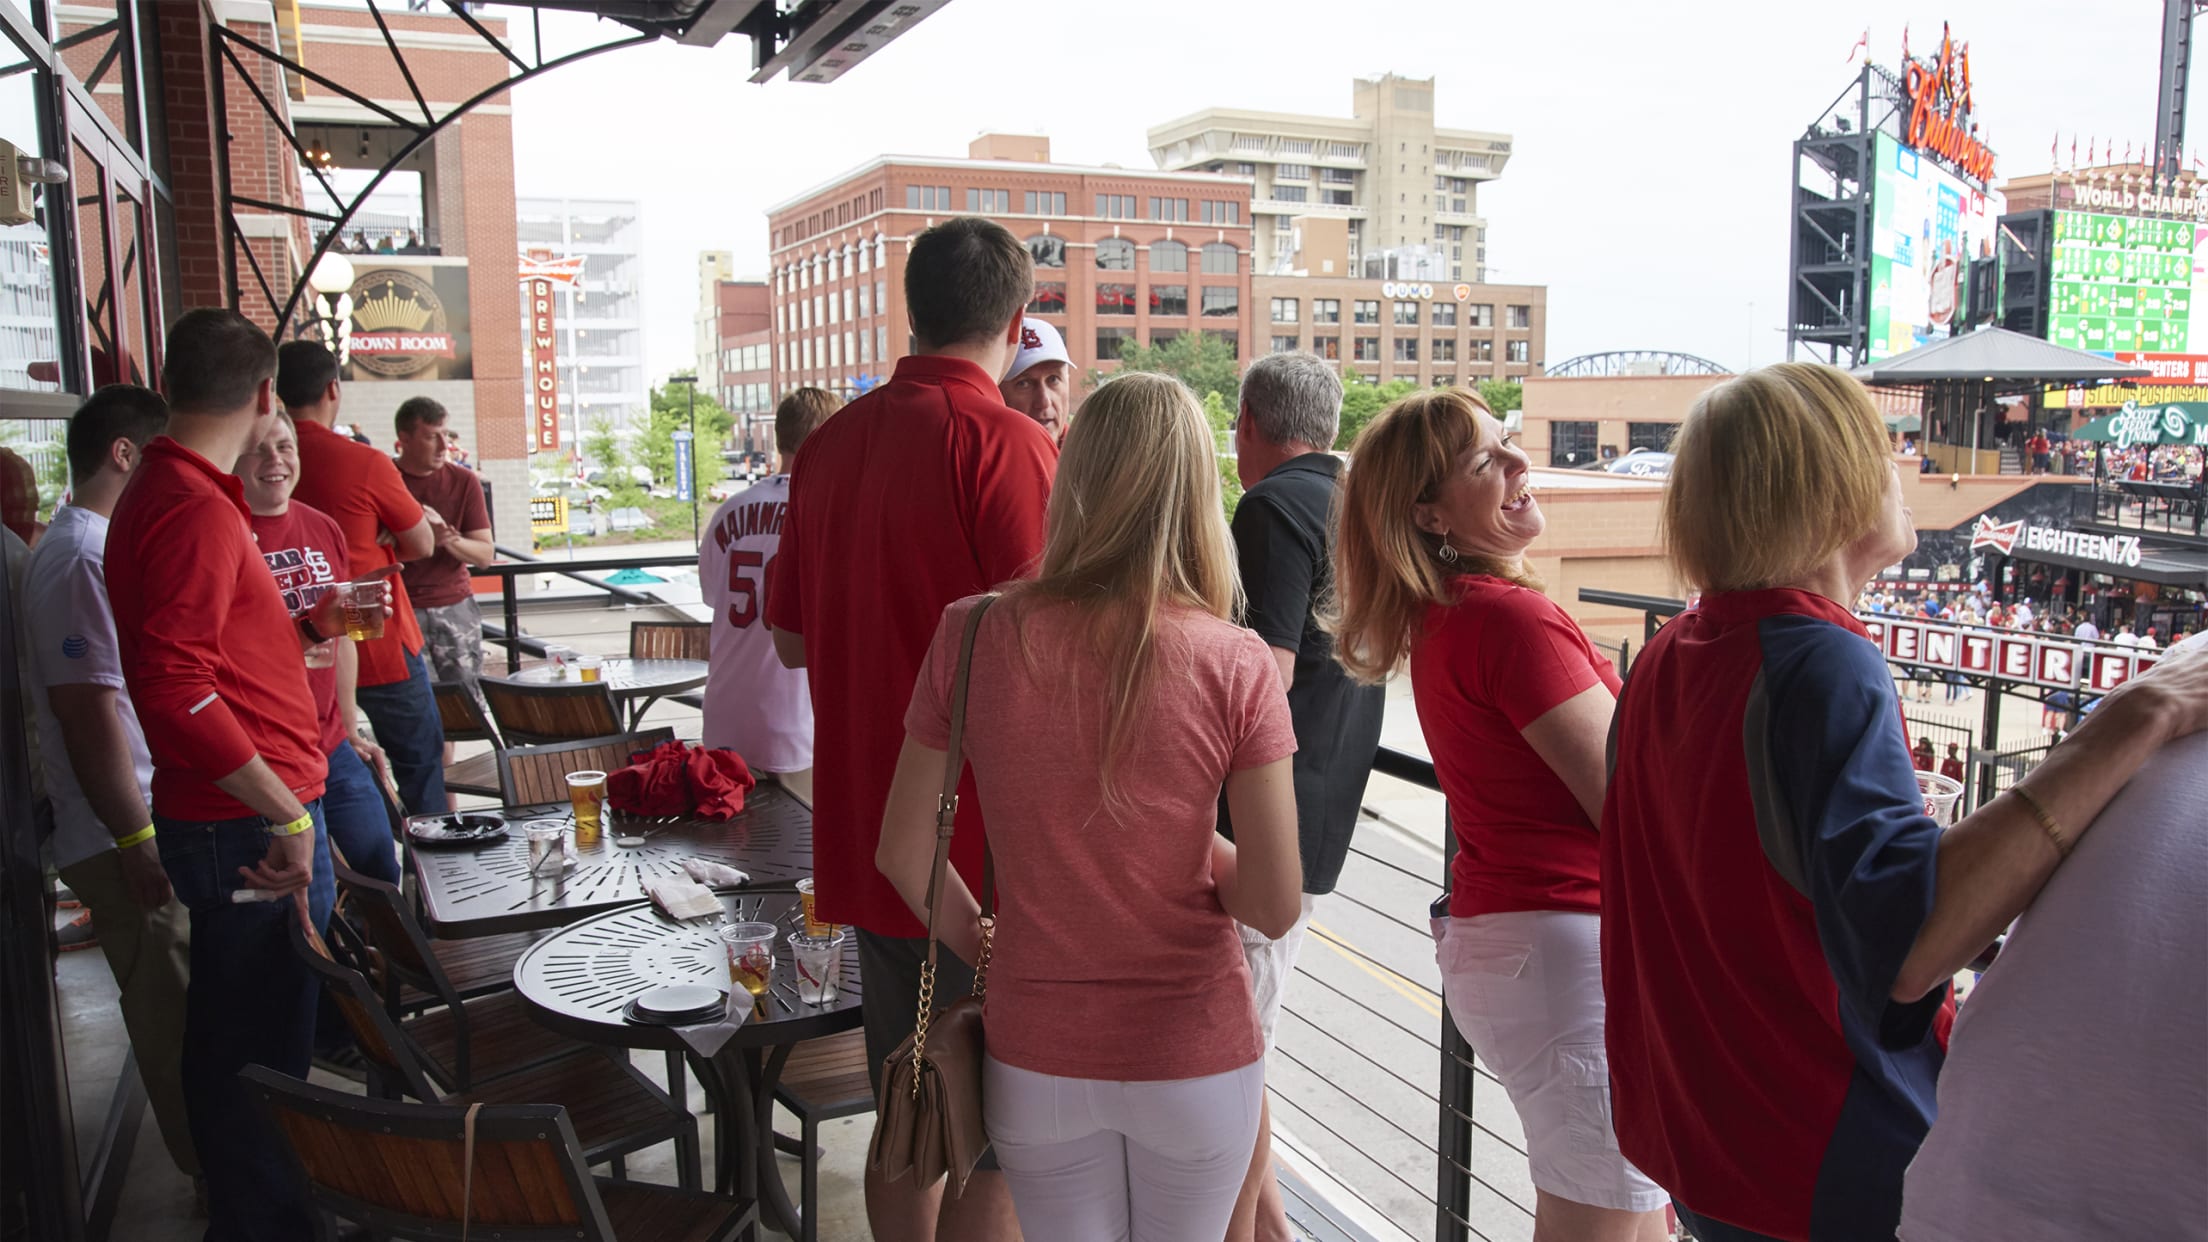 St. Louis Cardinals Party Suites AKA Box Seats — The Foodie's Travel Guide